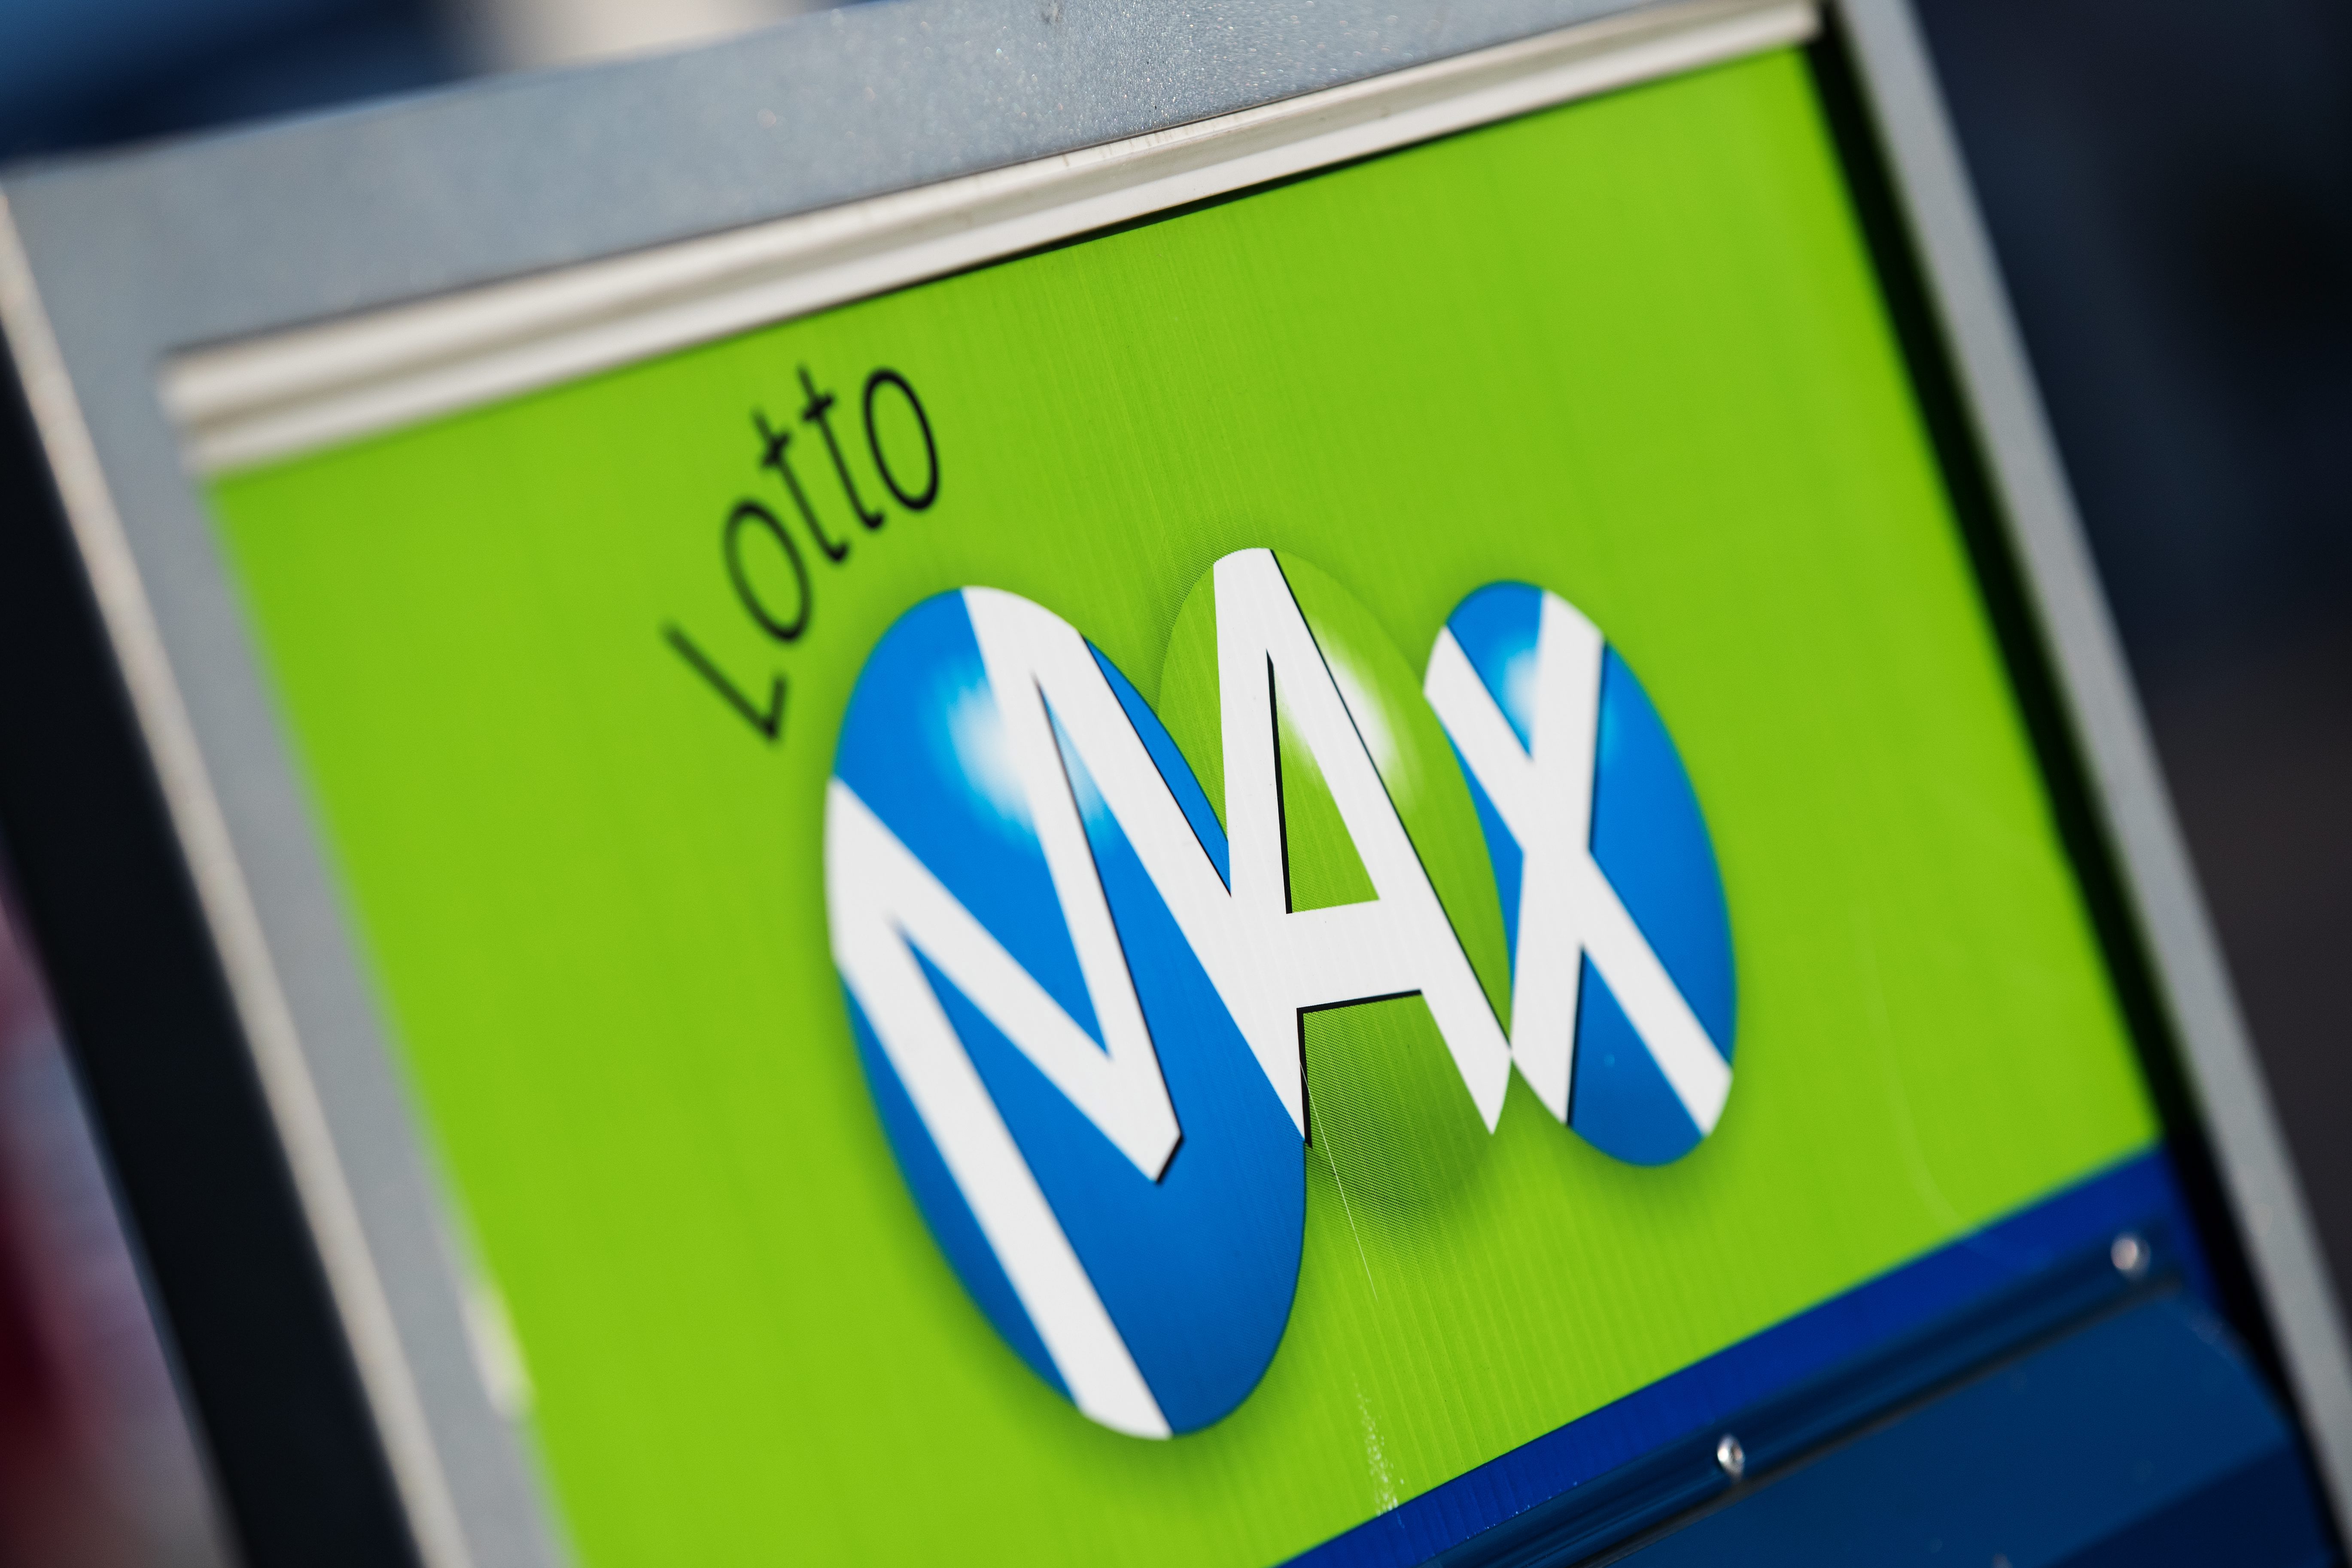 lotto max for tuesday